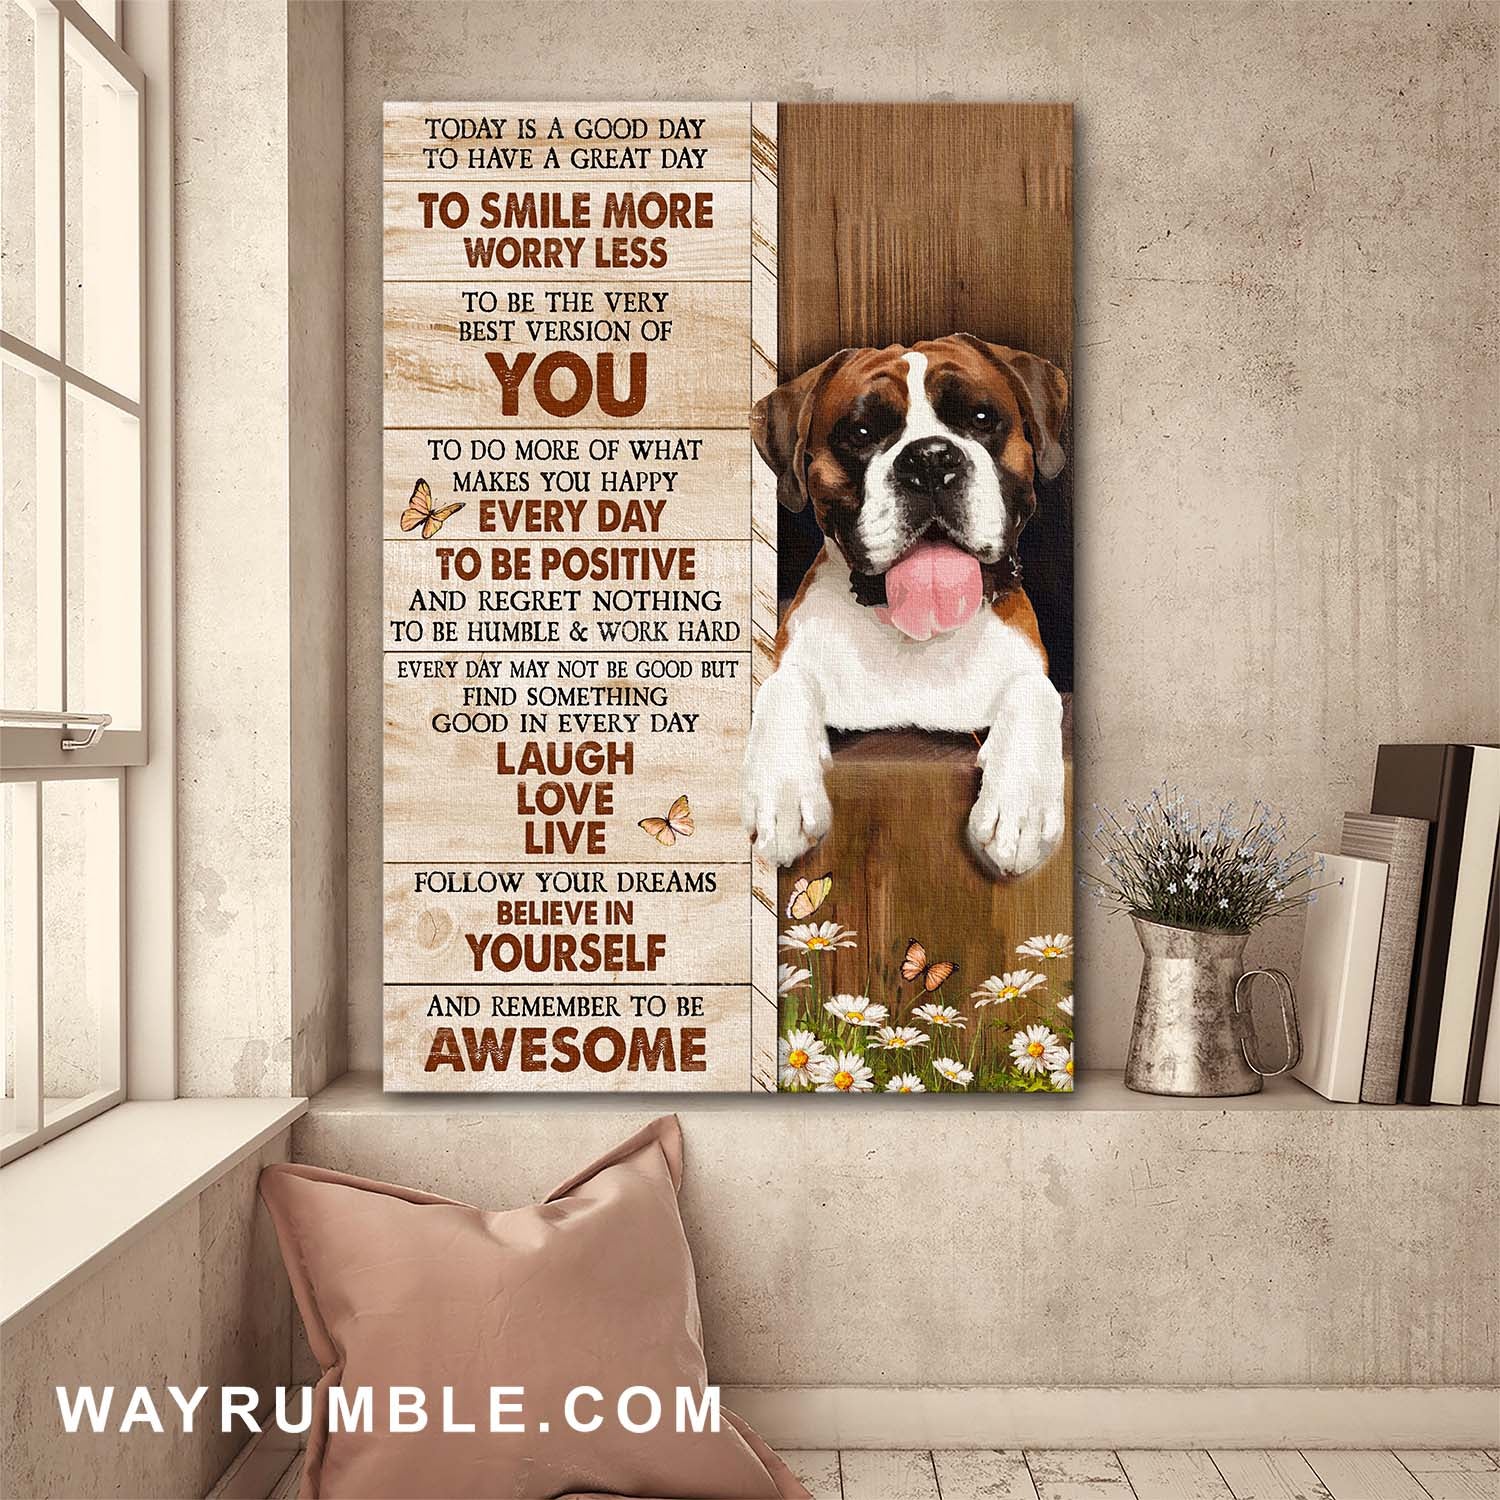 Boxer, Believe in yourself and remember to be awesome - Dog Portrait Canvas Prints, Wall Art